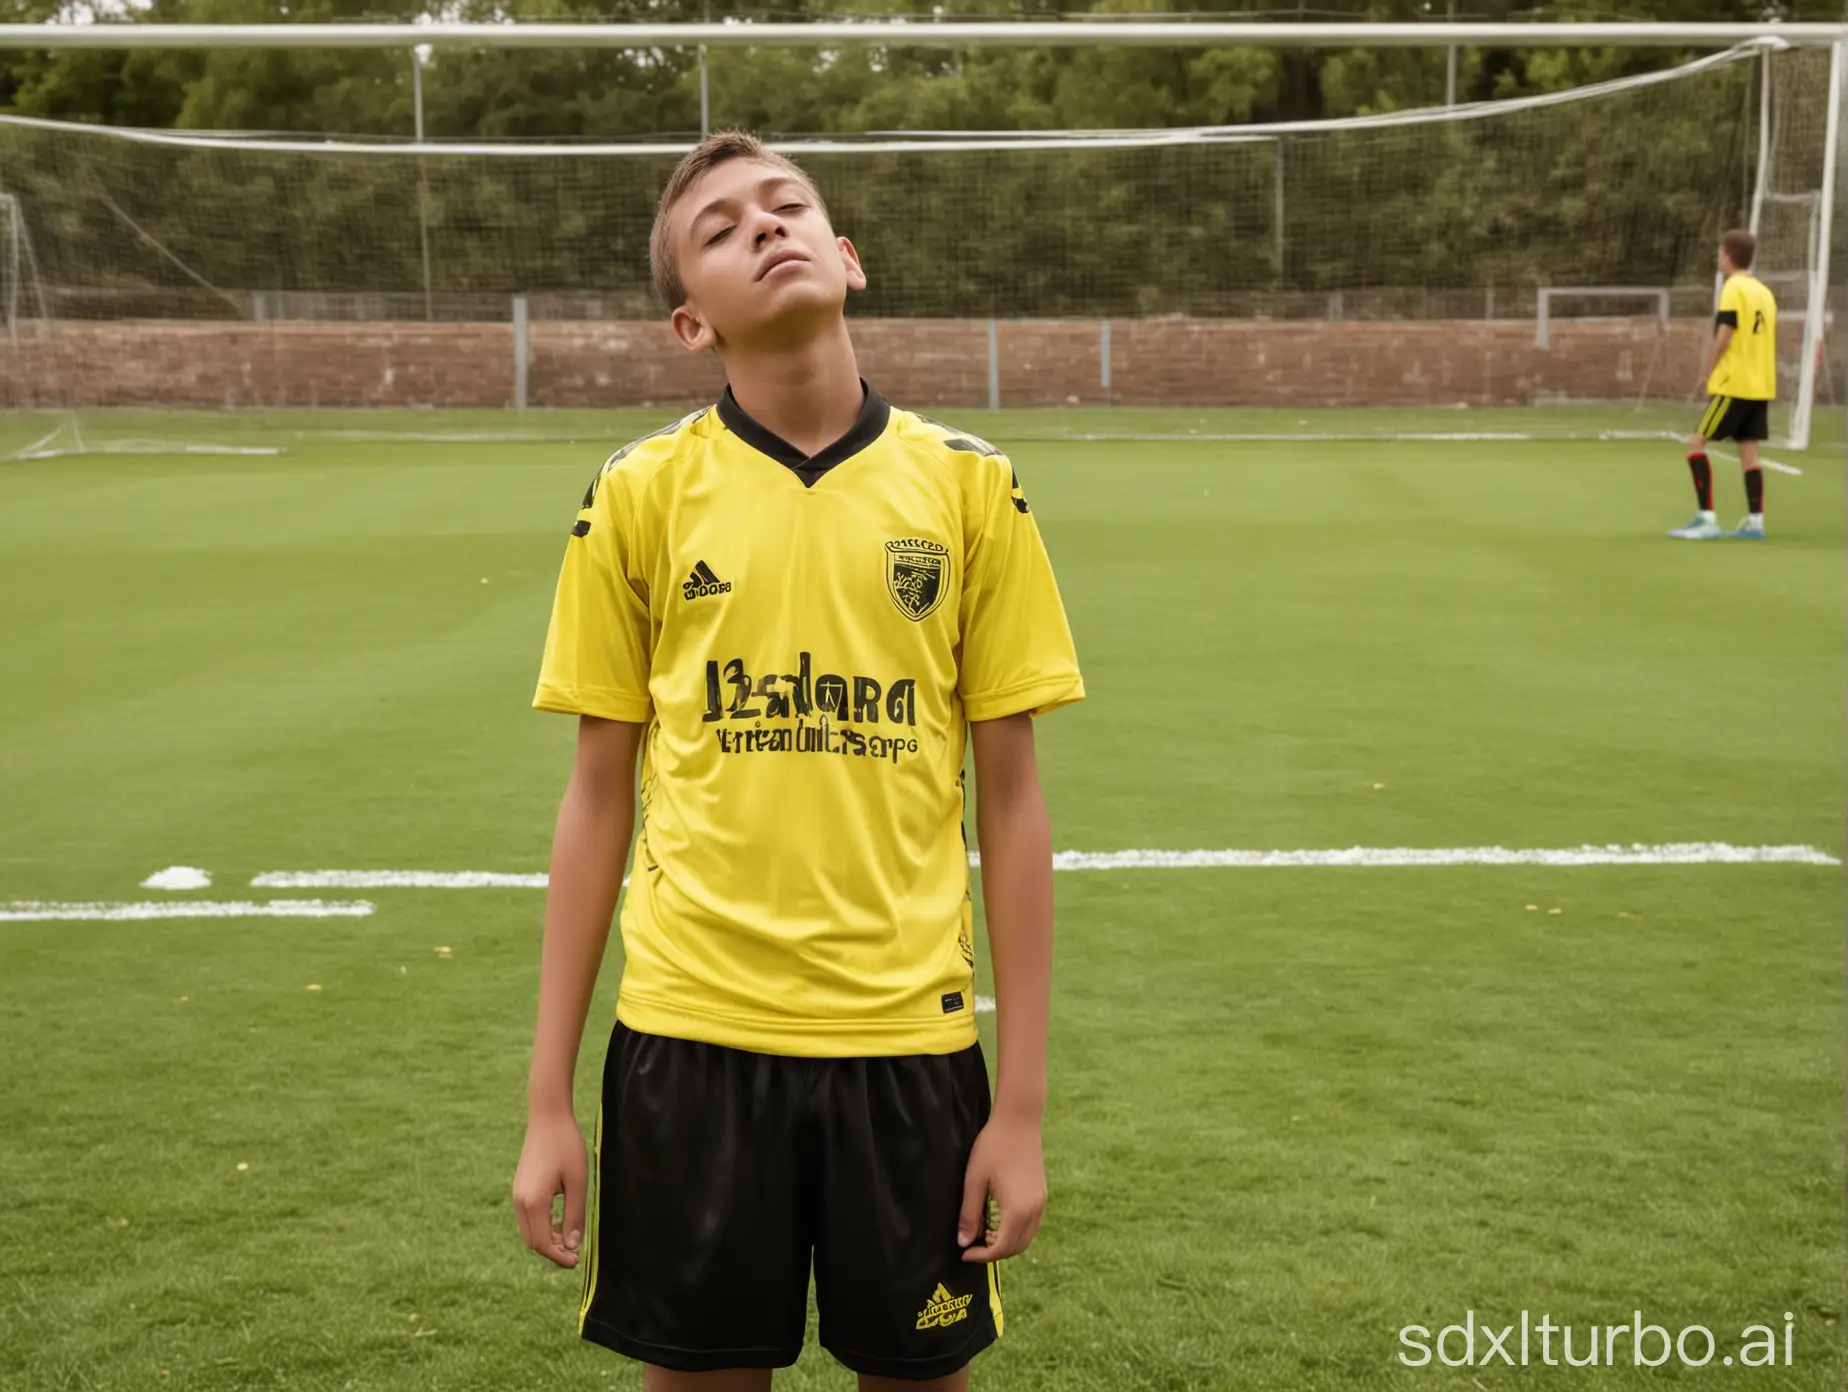 13 year old boys wearing black and yellow football shirts and shorts asleep standing eyes closed standing on football pitch